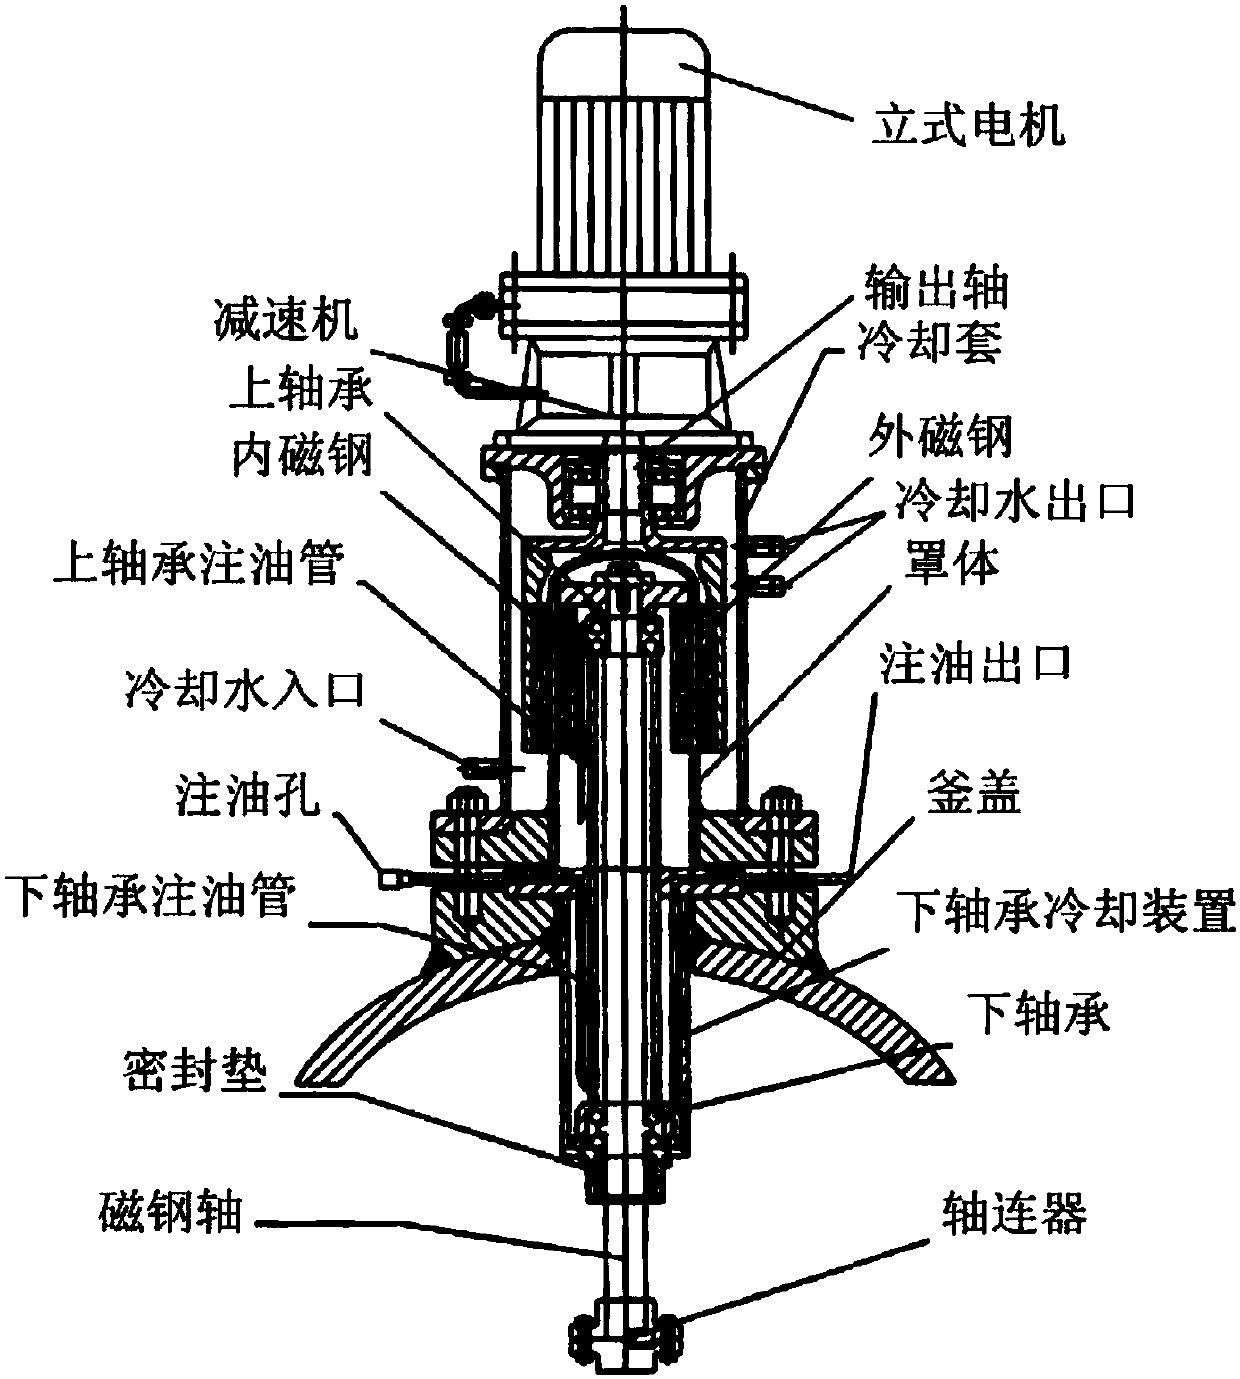 Chemical mechanical system with T-type paddle horizontal reactor